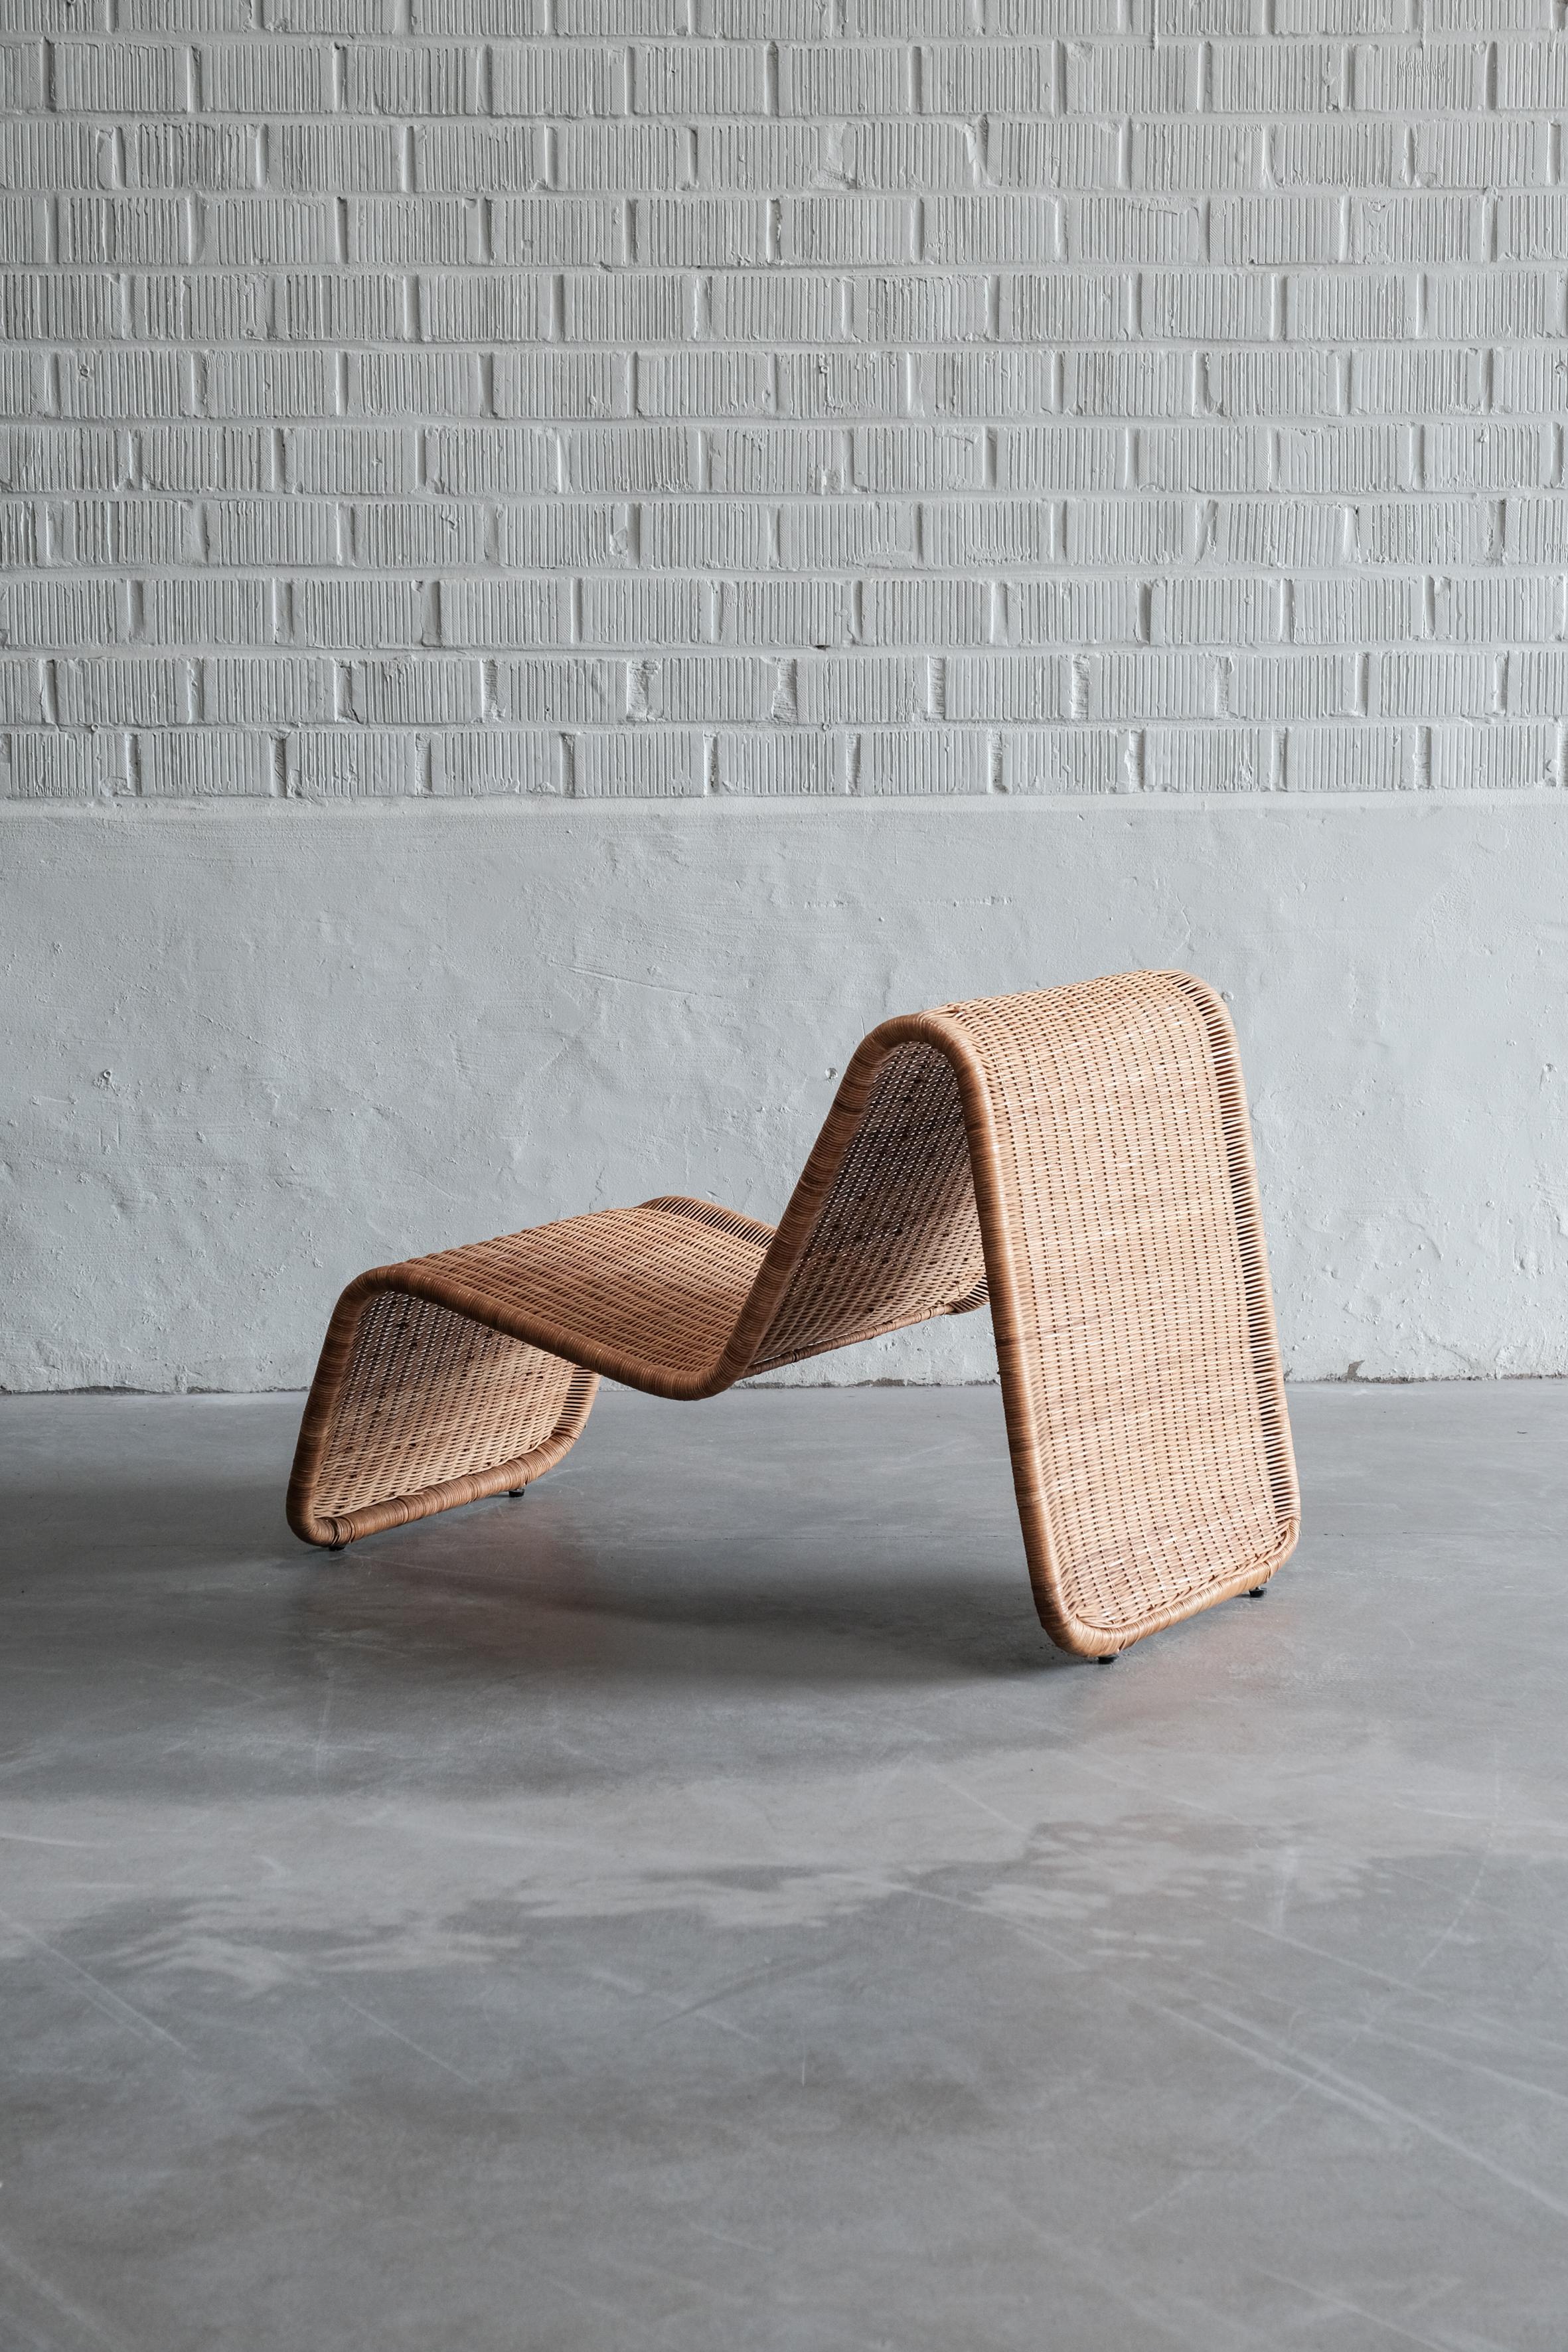 Wicker lounge chair in the manner of Tito Agnoli, 1970 Italy.